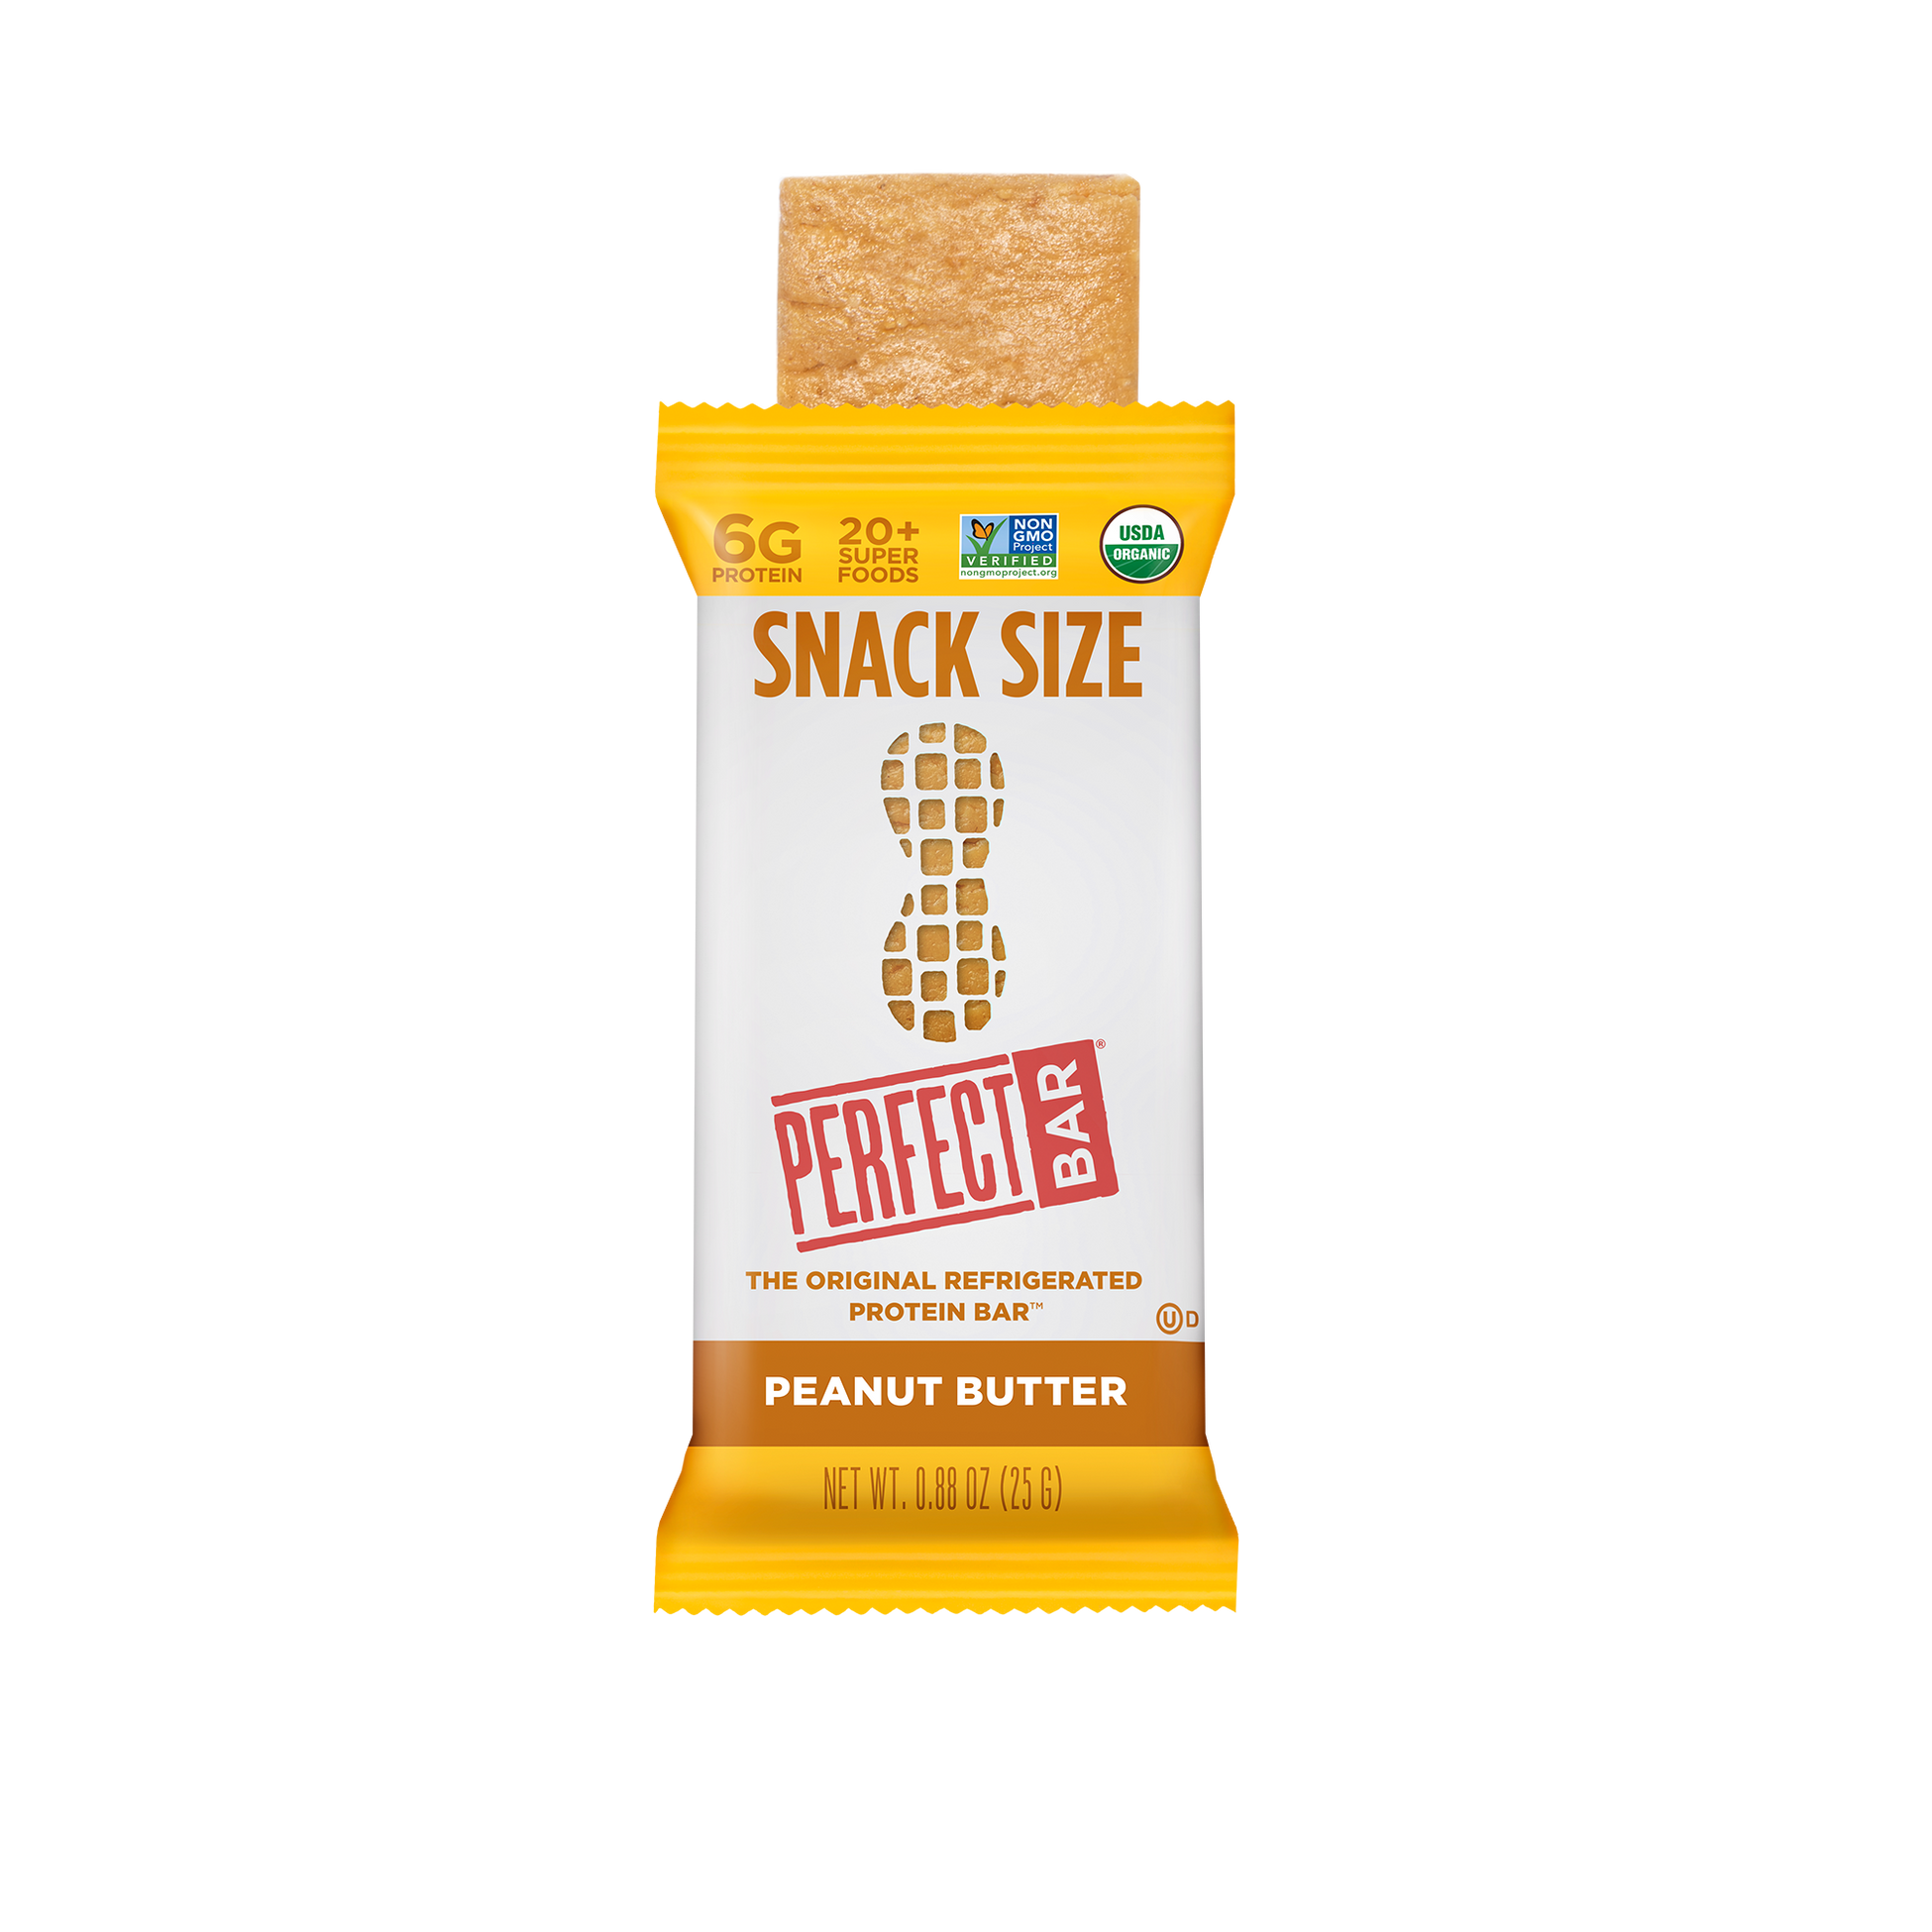 Peanut Butter Snack Size – Perfect Snacks